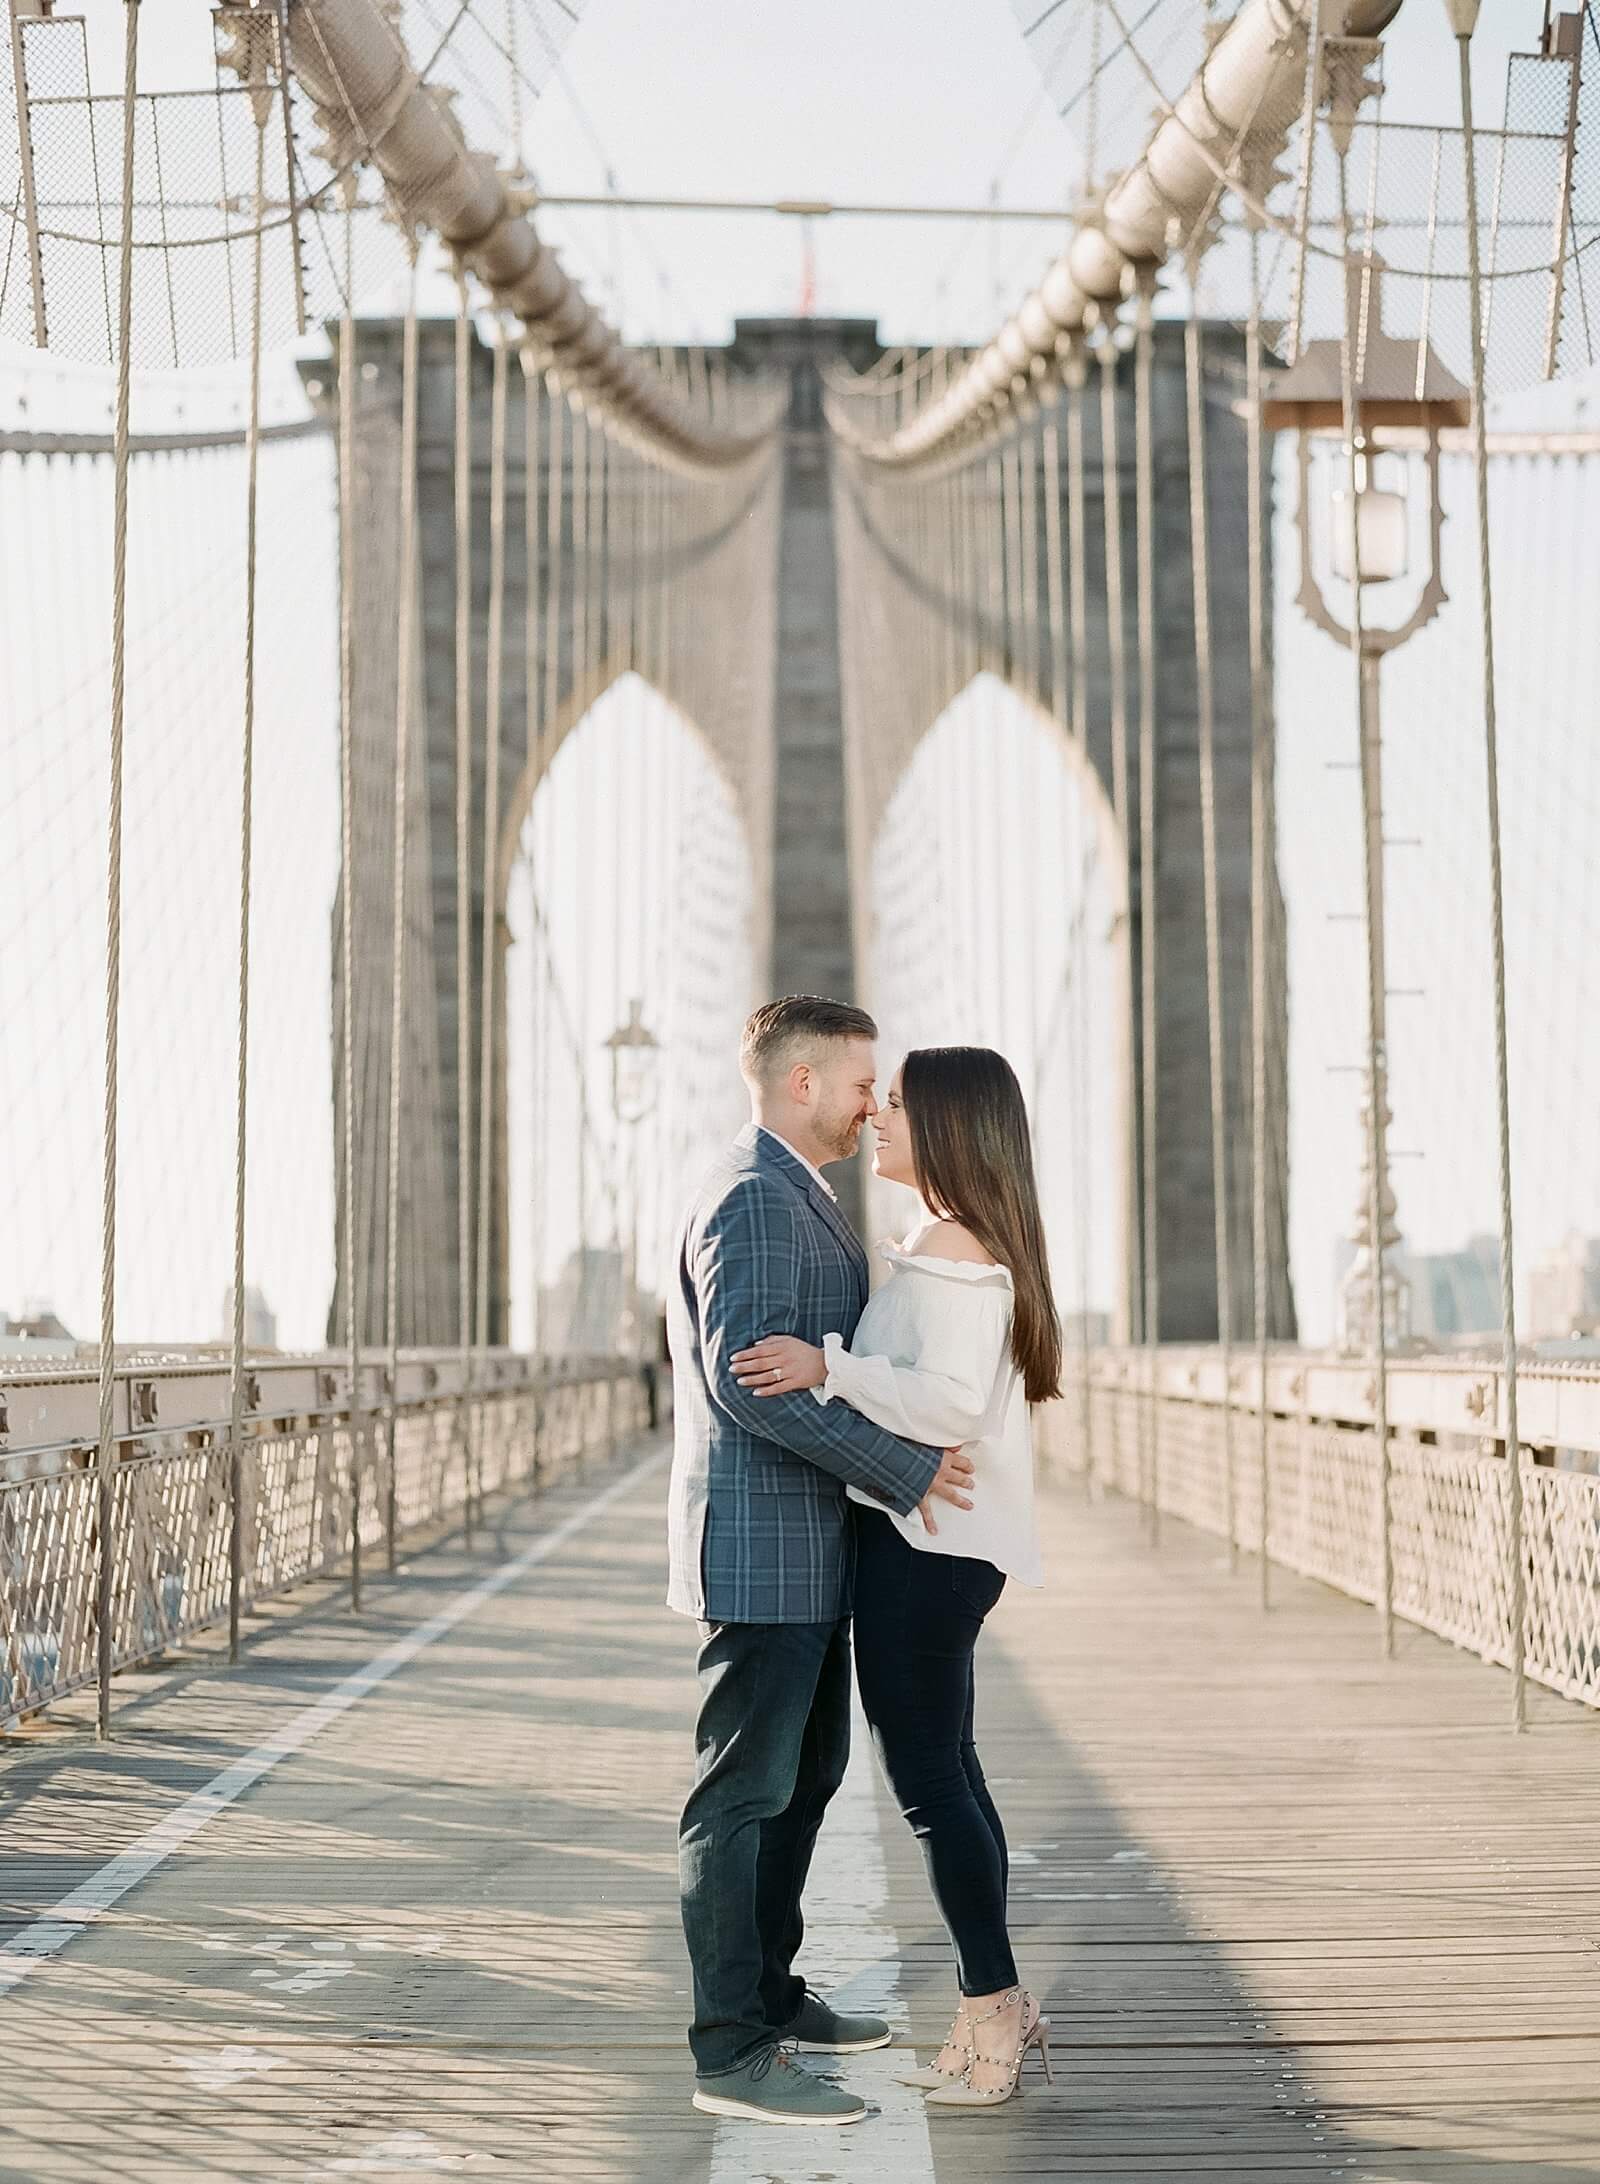 Couple during their engagement session on the Brooklyn Bridge.